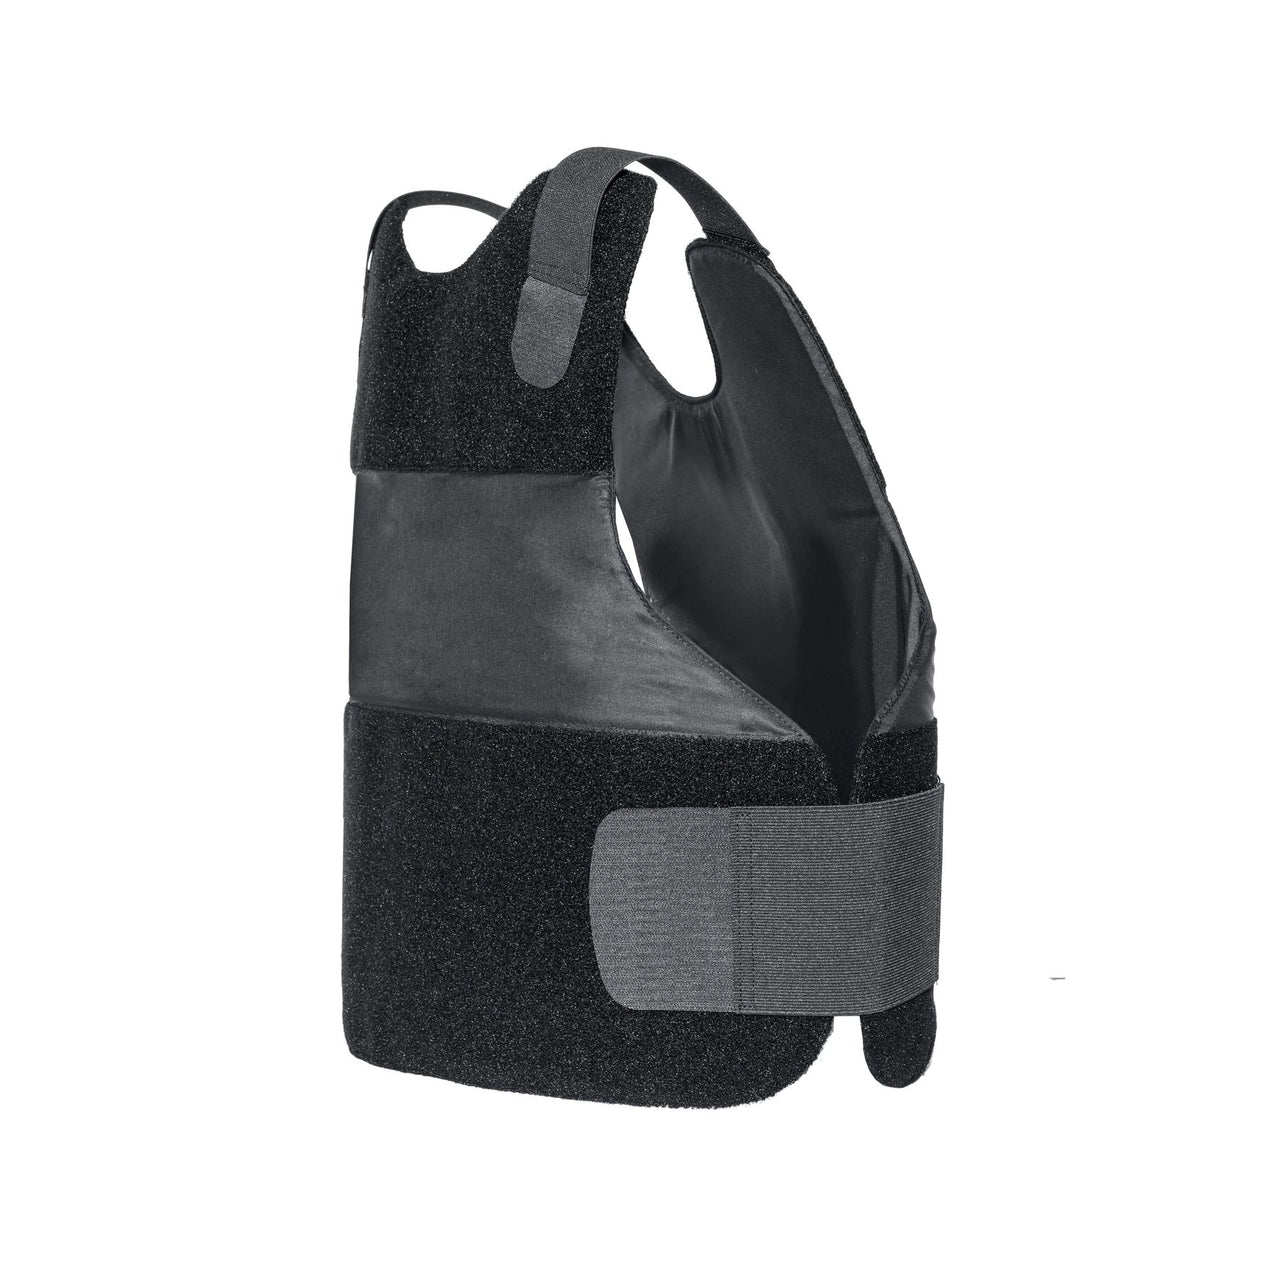 A Body Armor Direct Freedom Concealable Carrier vest on a white background.